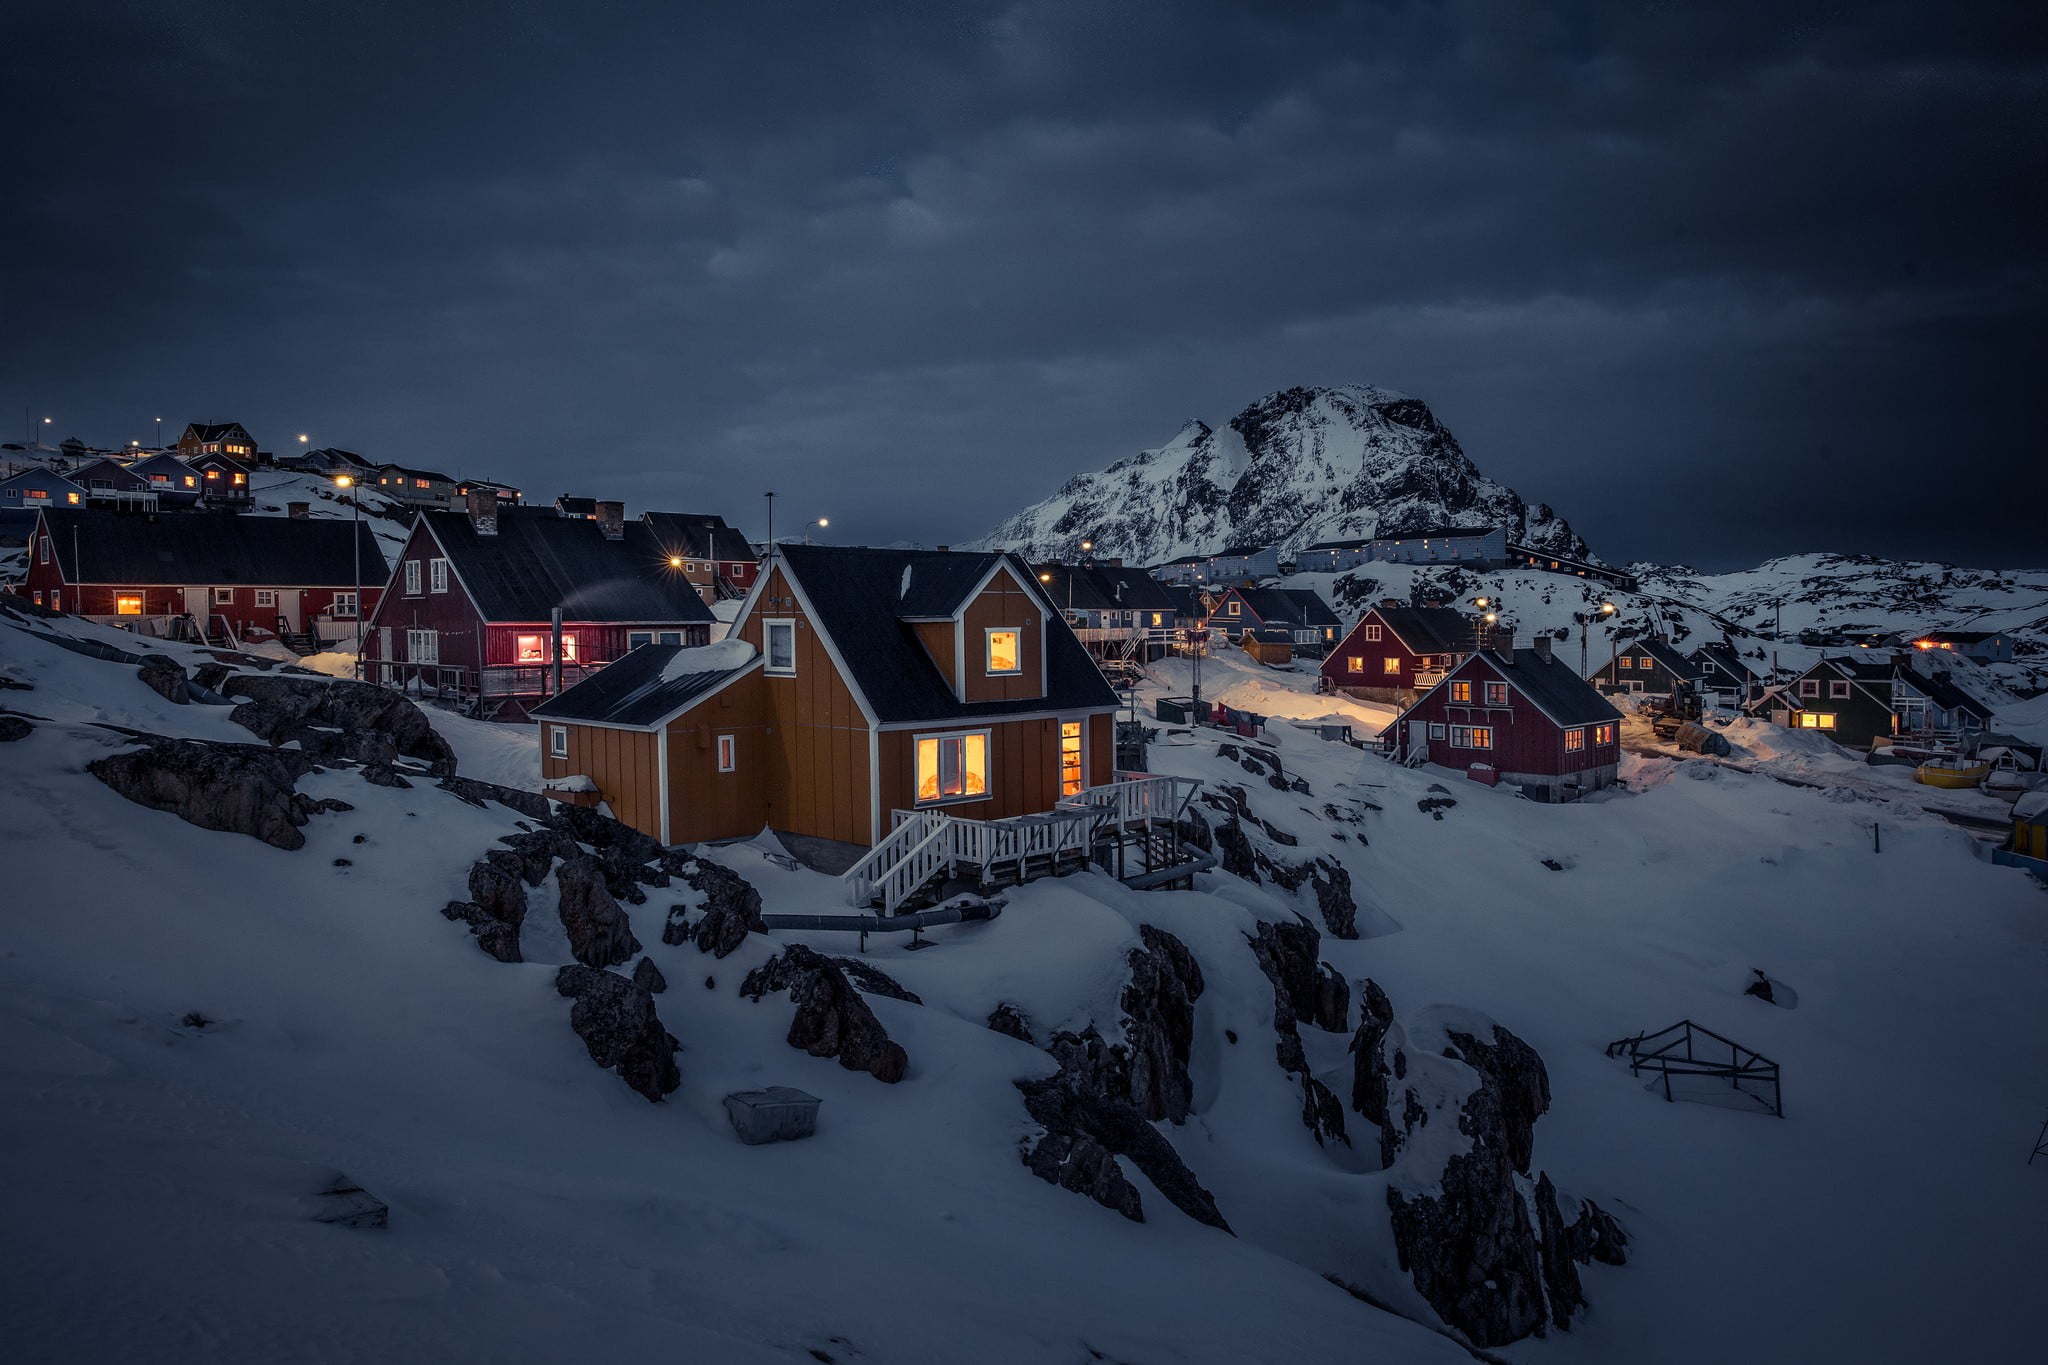 white and brown house, Greenland, night, house, landscape